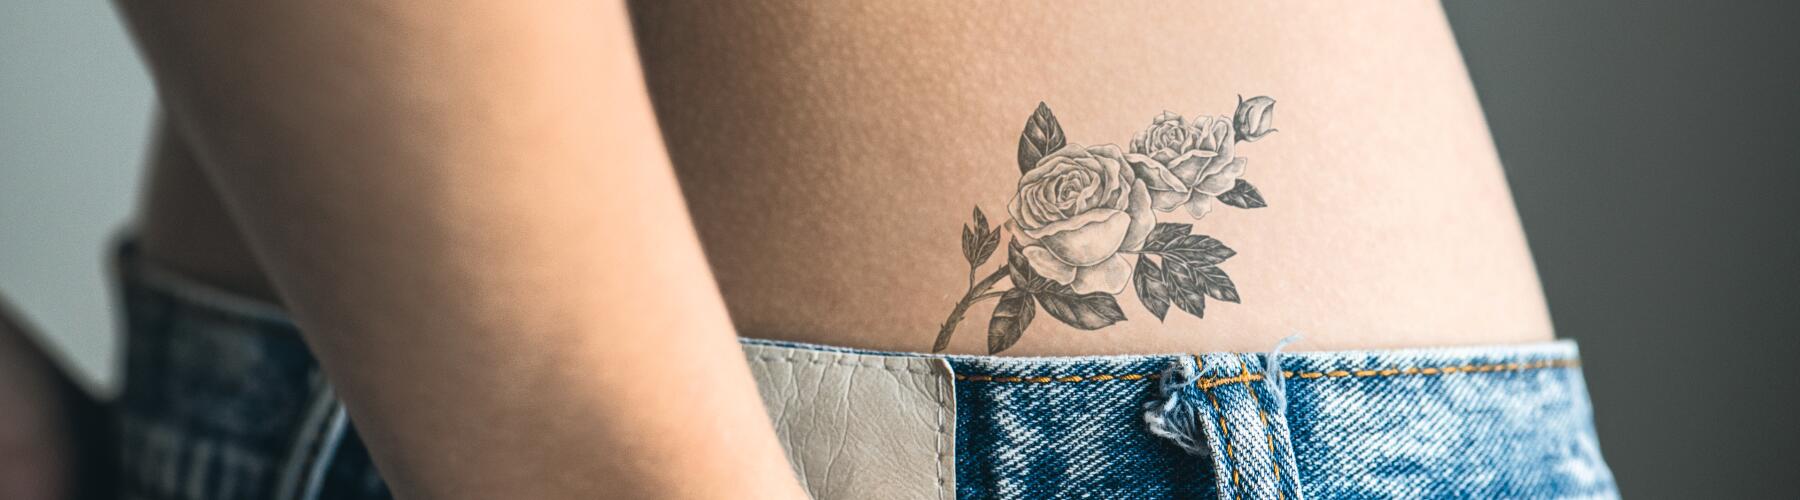 AD_TATTOOS_WOMAN-HIP-FLOWERS_LARGE